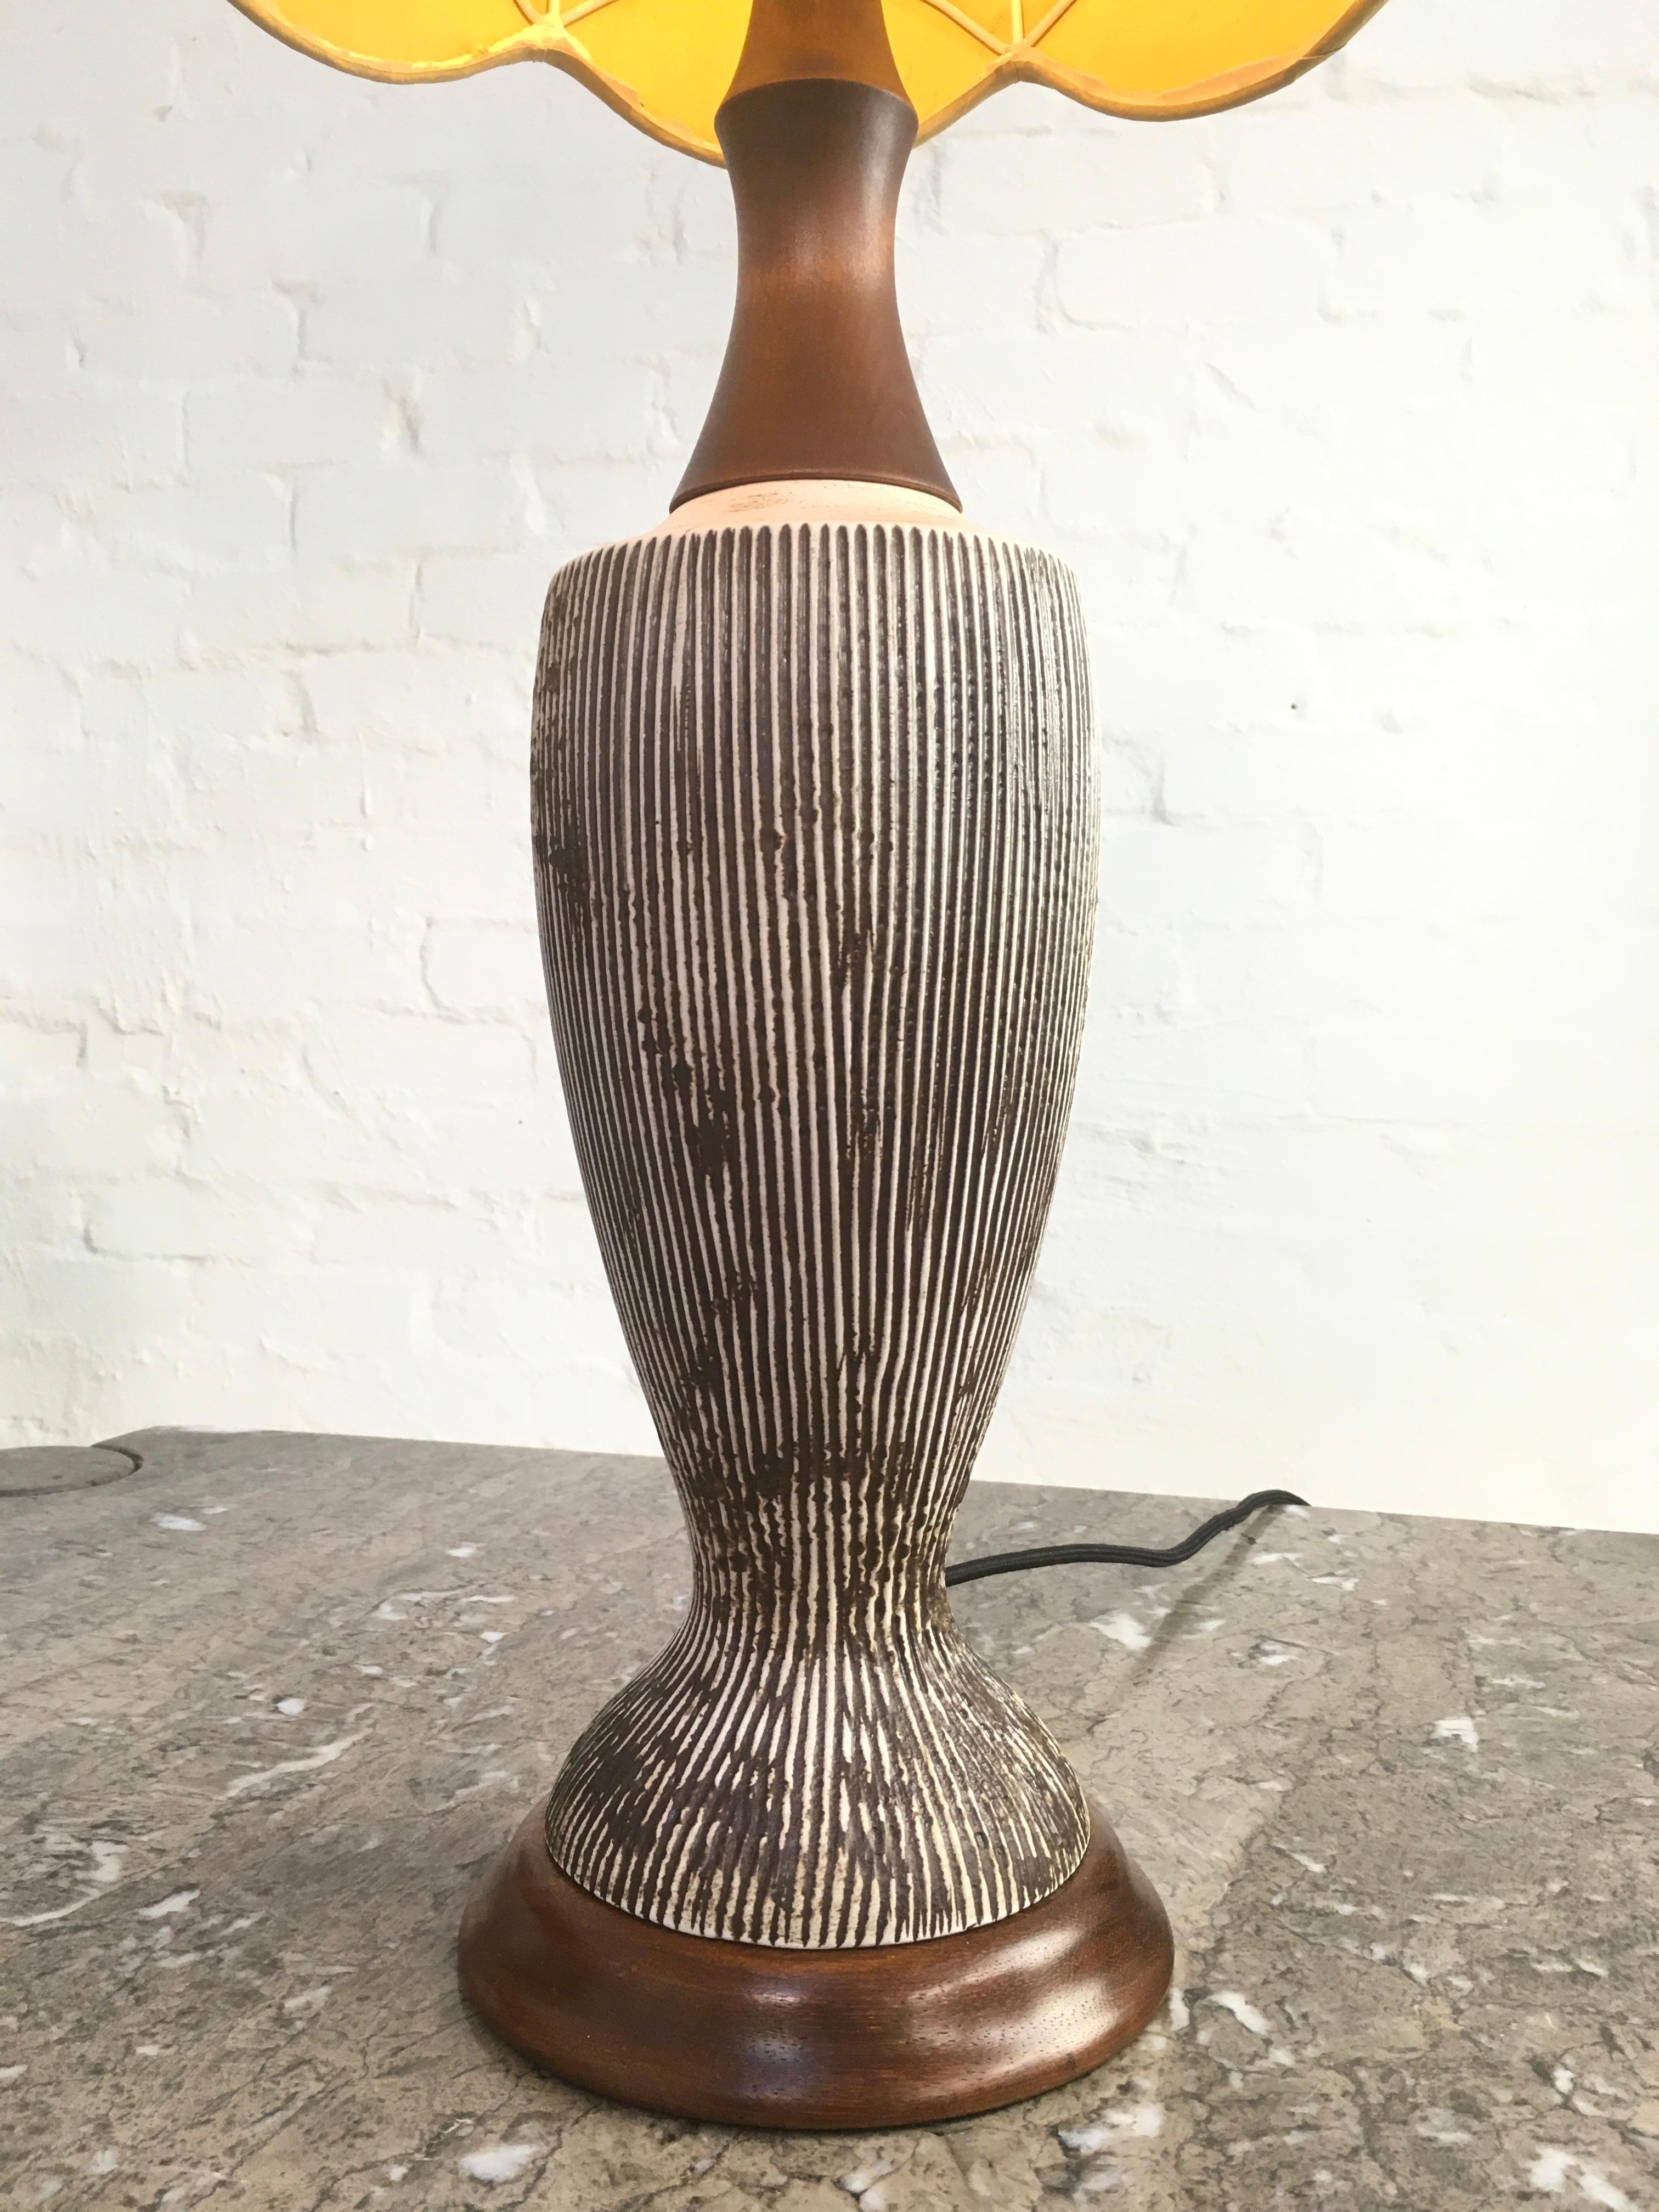 Stained Ellis Pottery Sgraffito Ceramic and 'Walnut' Table Lamp Base Melbourne, 1950s For Sale